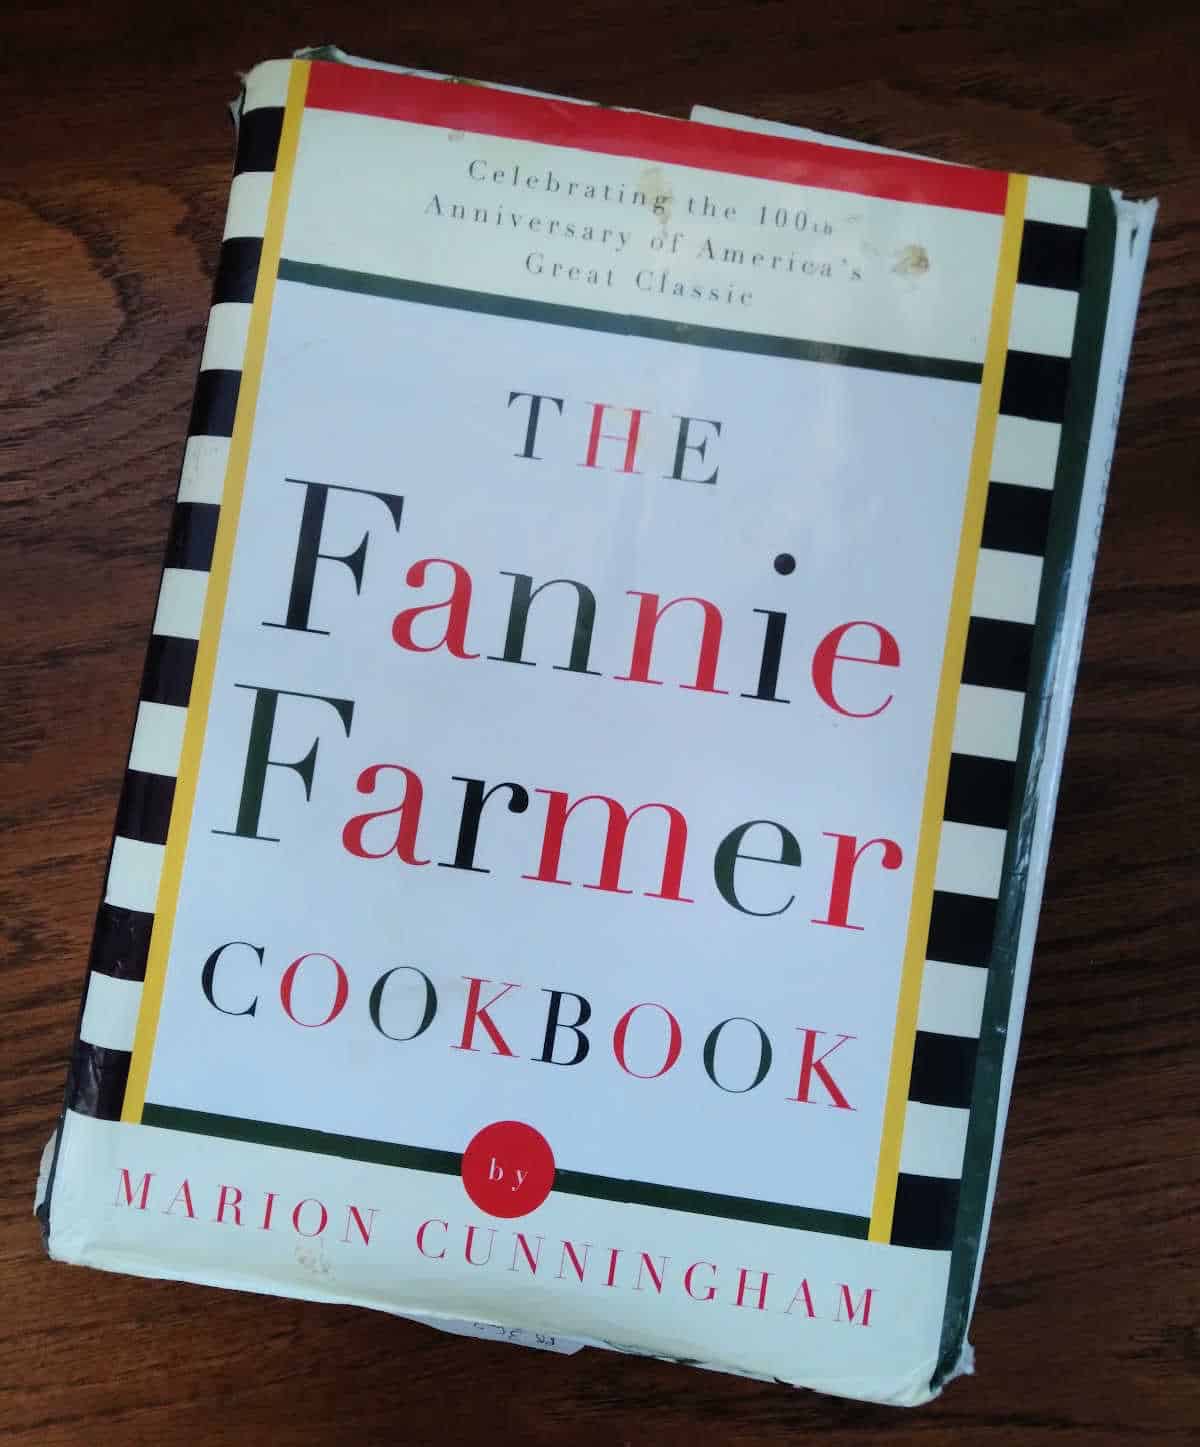 the cover of my personal copy of The Fannie Farmer Cookbook 100th Anniversary Edition